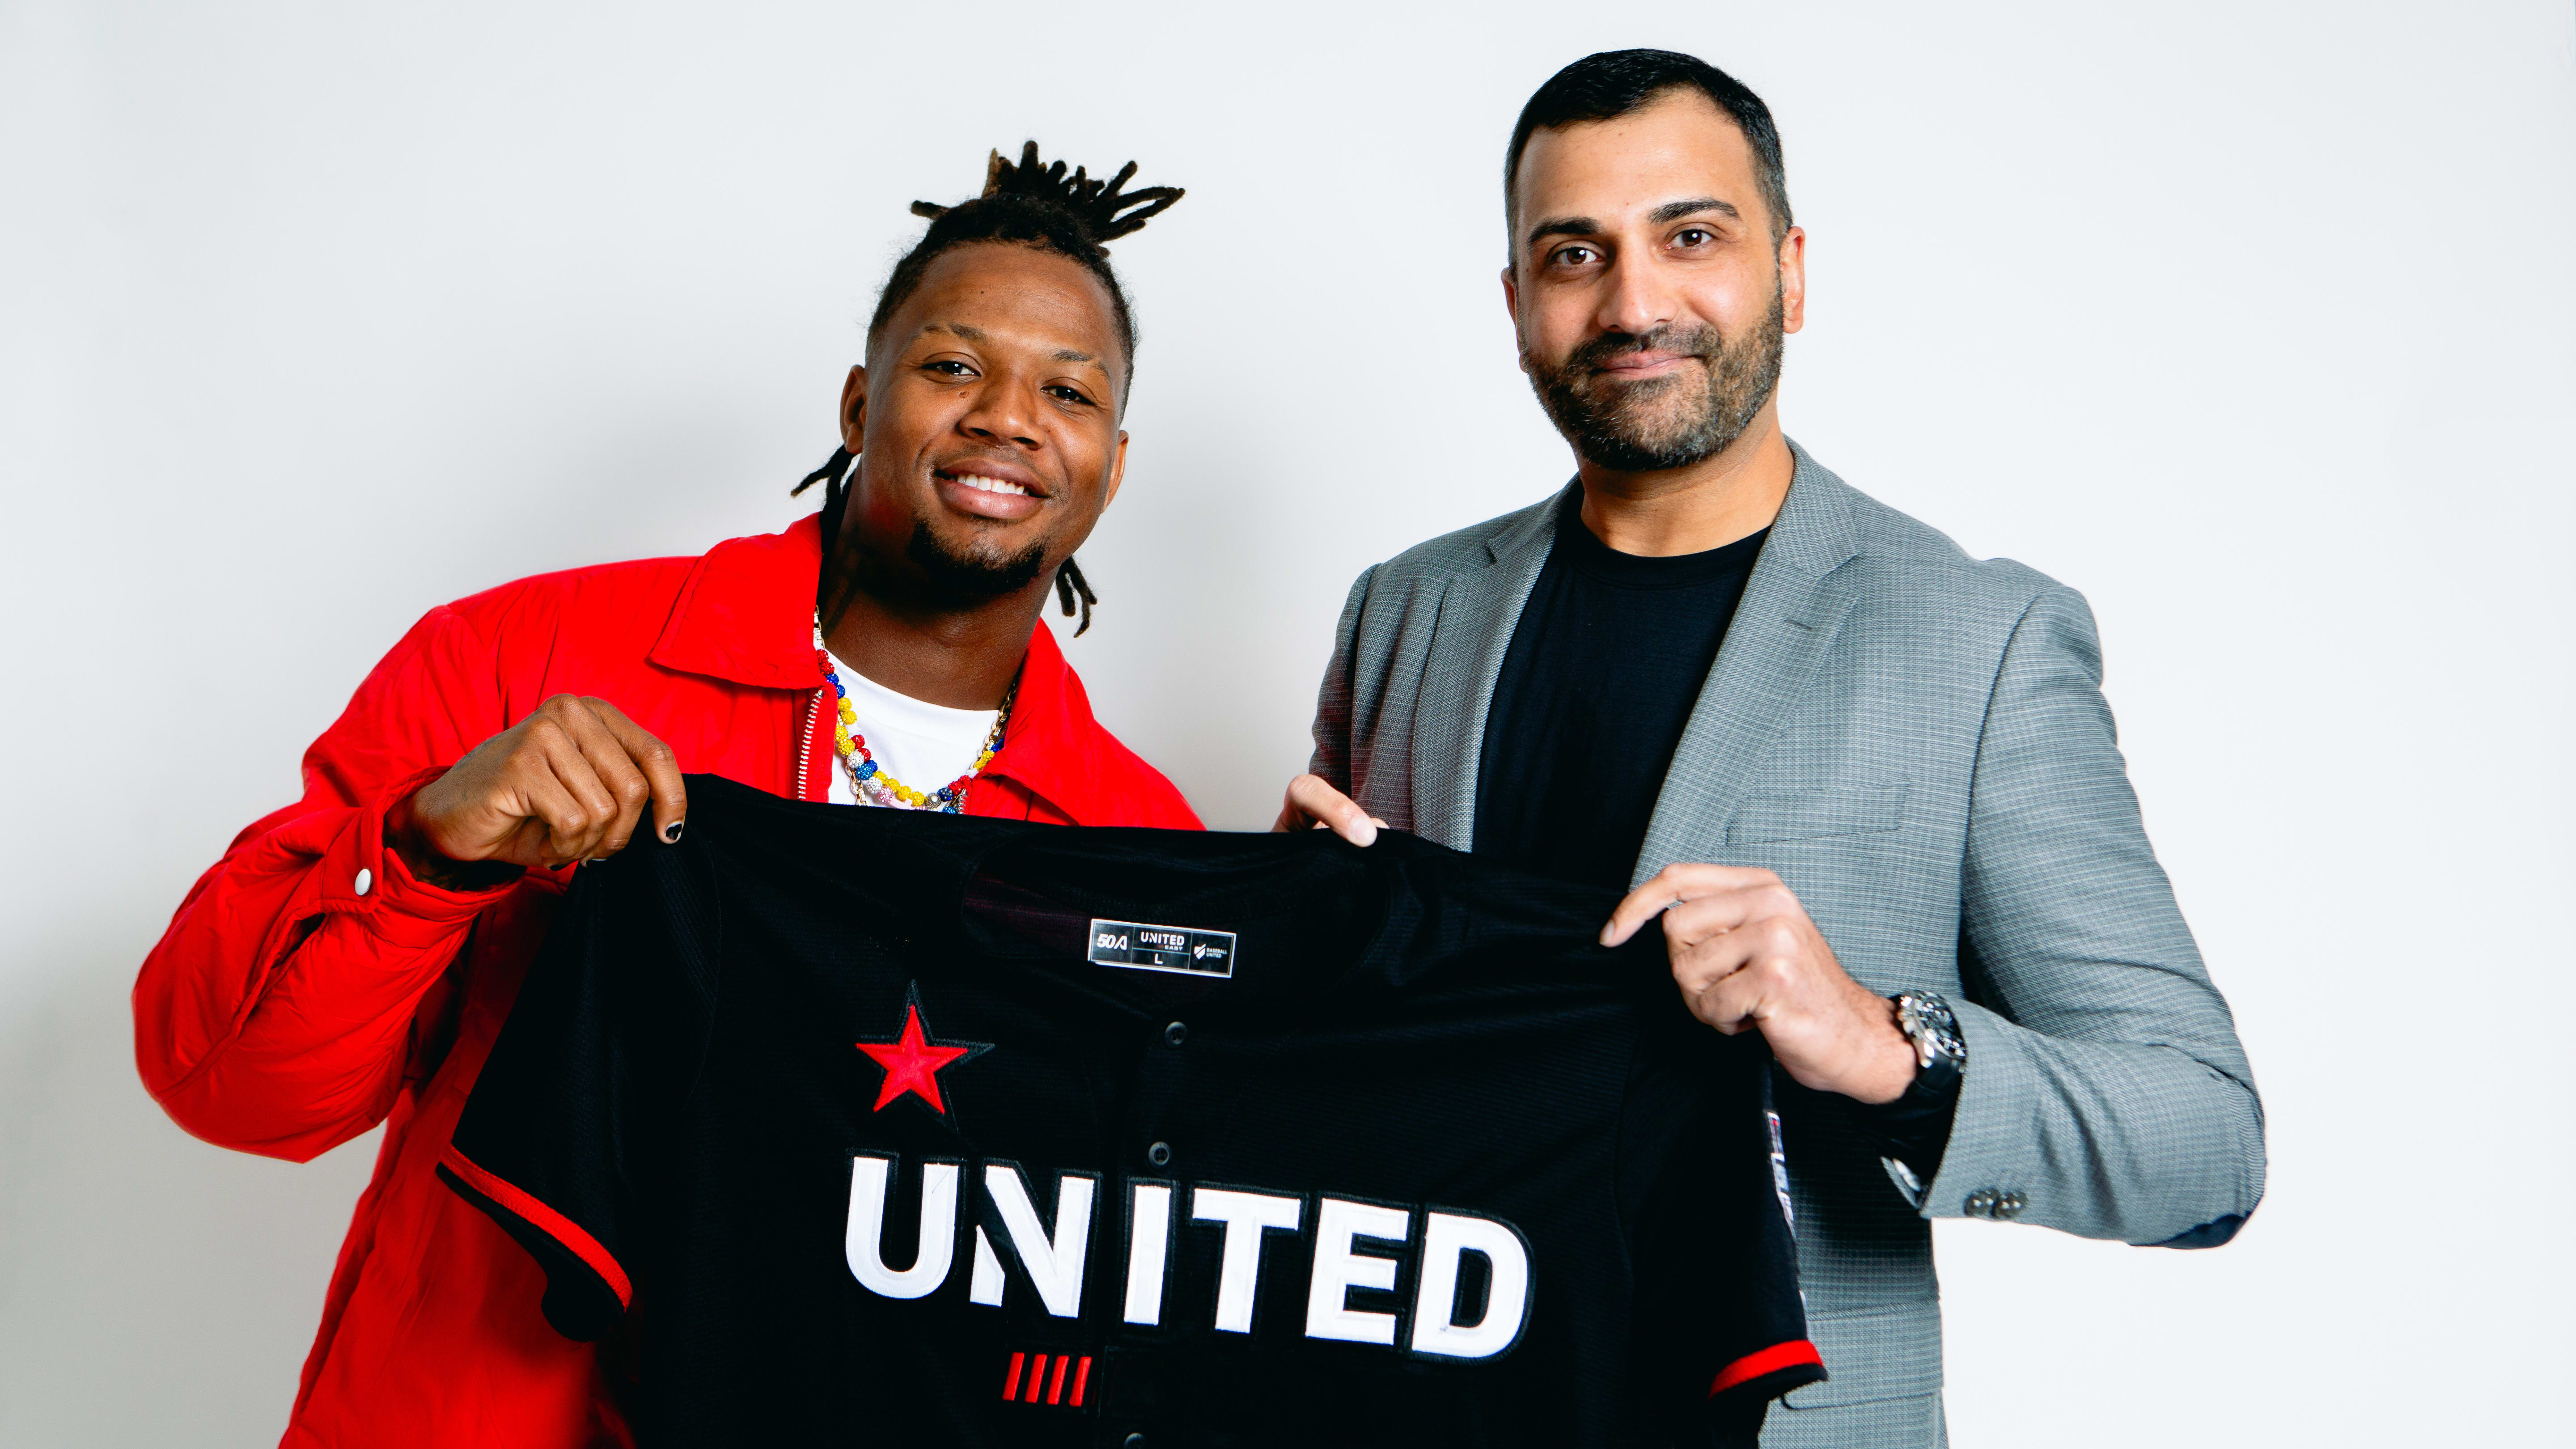 Atlanta Braves outfielder Ronald Acuña Jr. has invested in Kash Shaikh's Baseball United league, joining nineteen other MLB legends in the ownership group.  